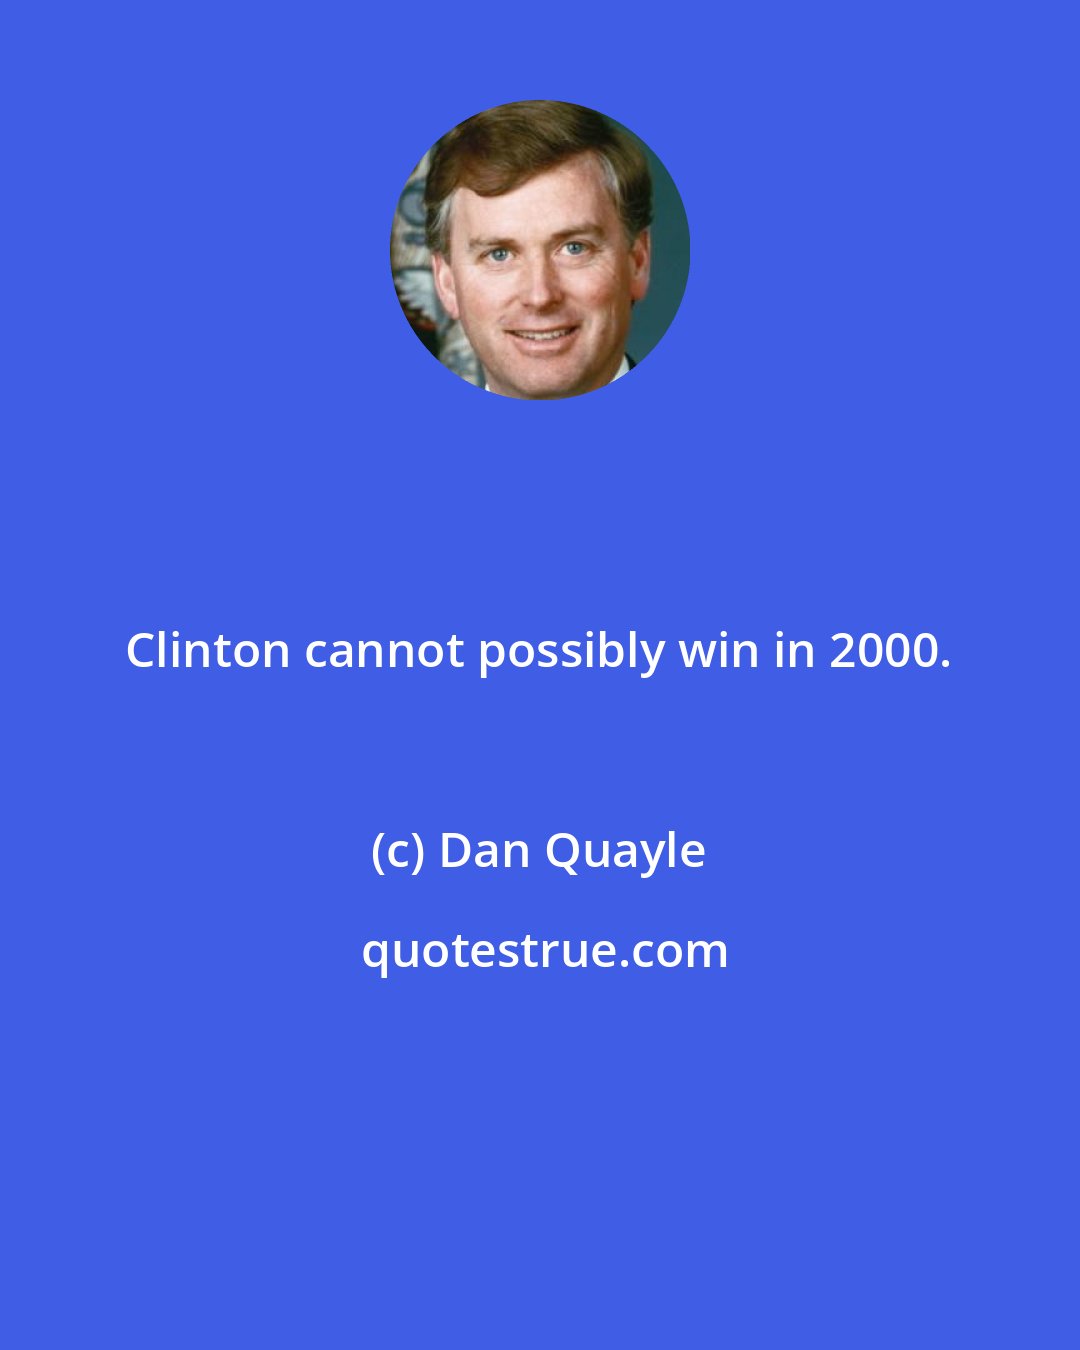 Dan Quayle: Clinton cannot possibly win in 2000.